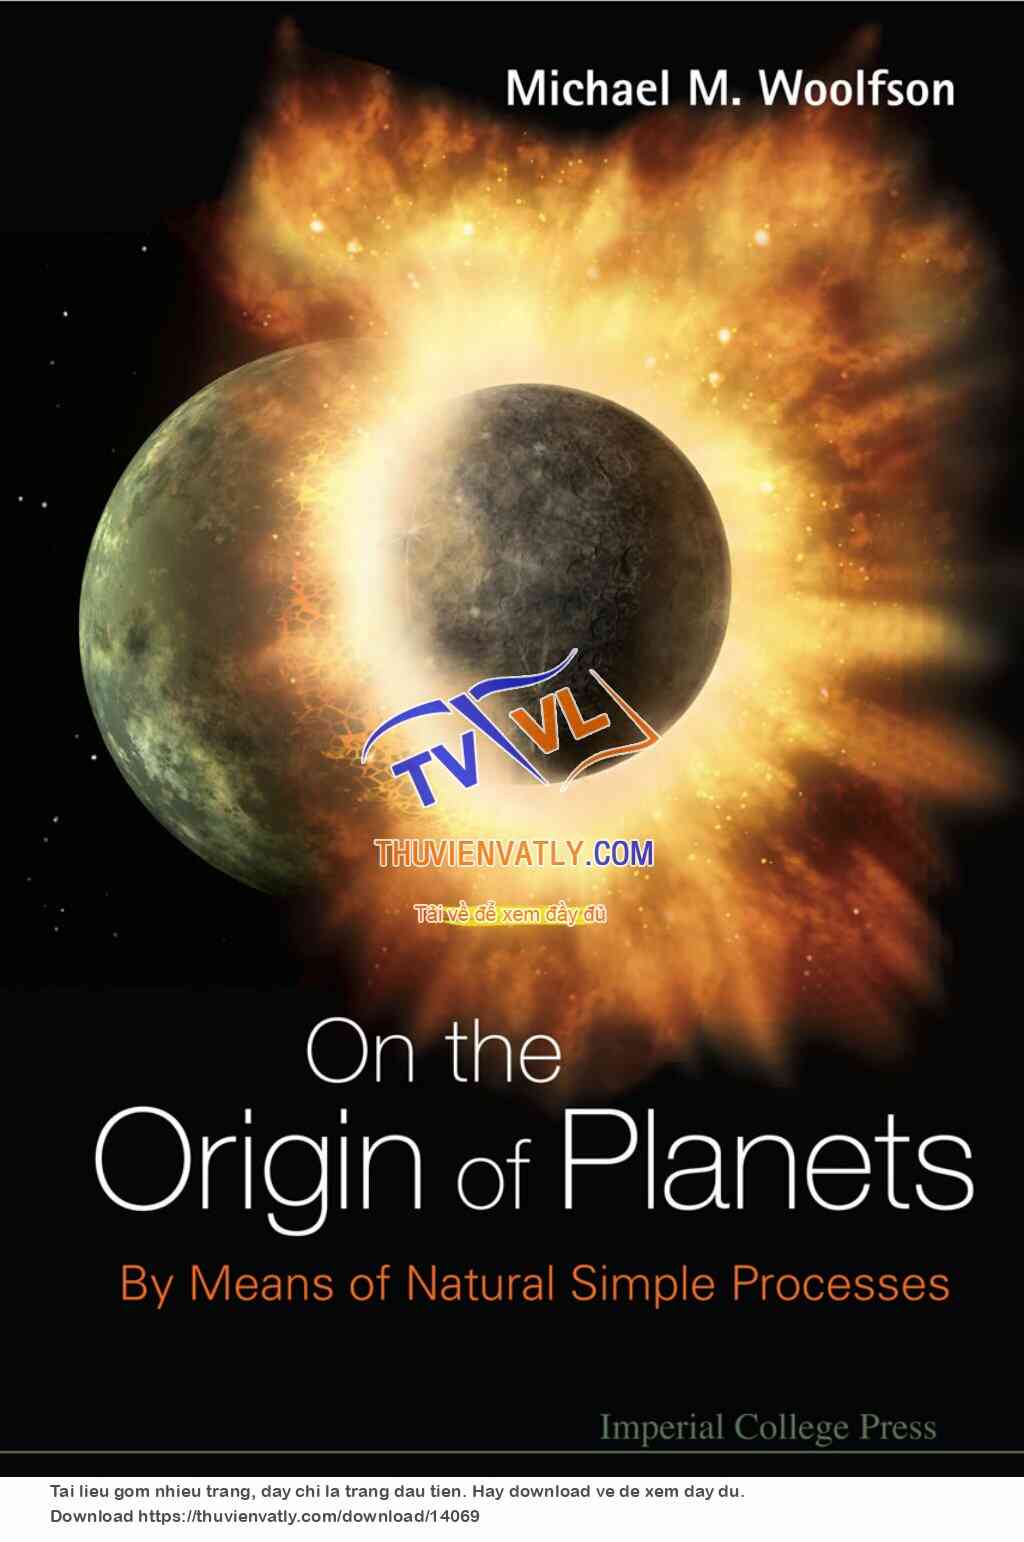 On the Origin of Planets - by Means of Natural Simple Processes - M. Woolfson (ICP, 2011)